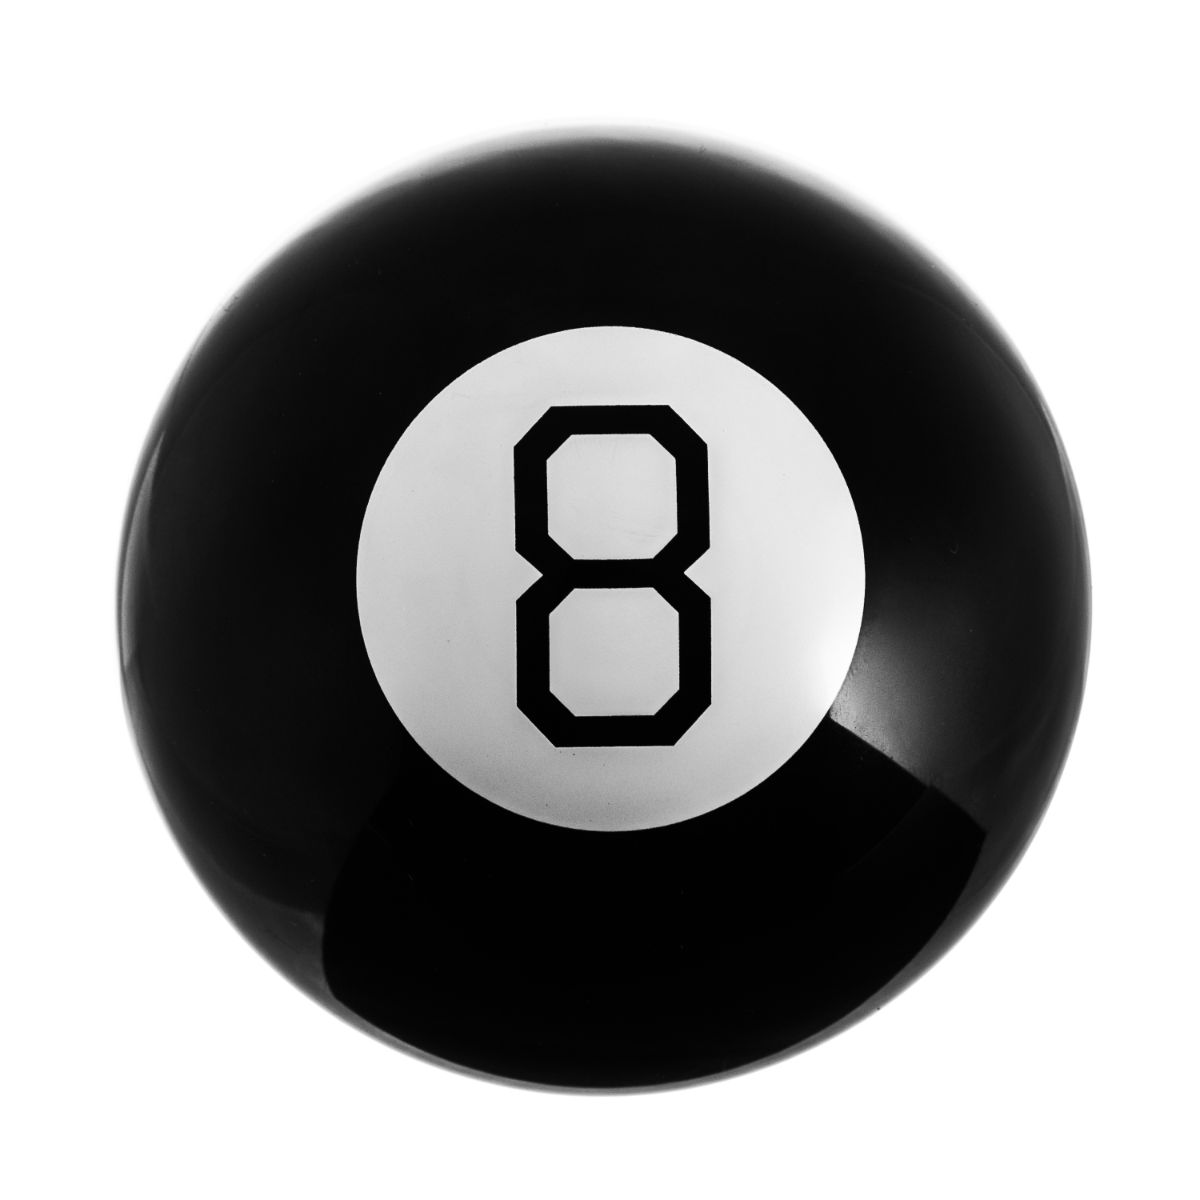 Retro Thing: Revealing The Mysteries Of The Magic 8 Ball